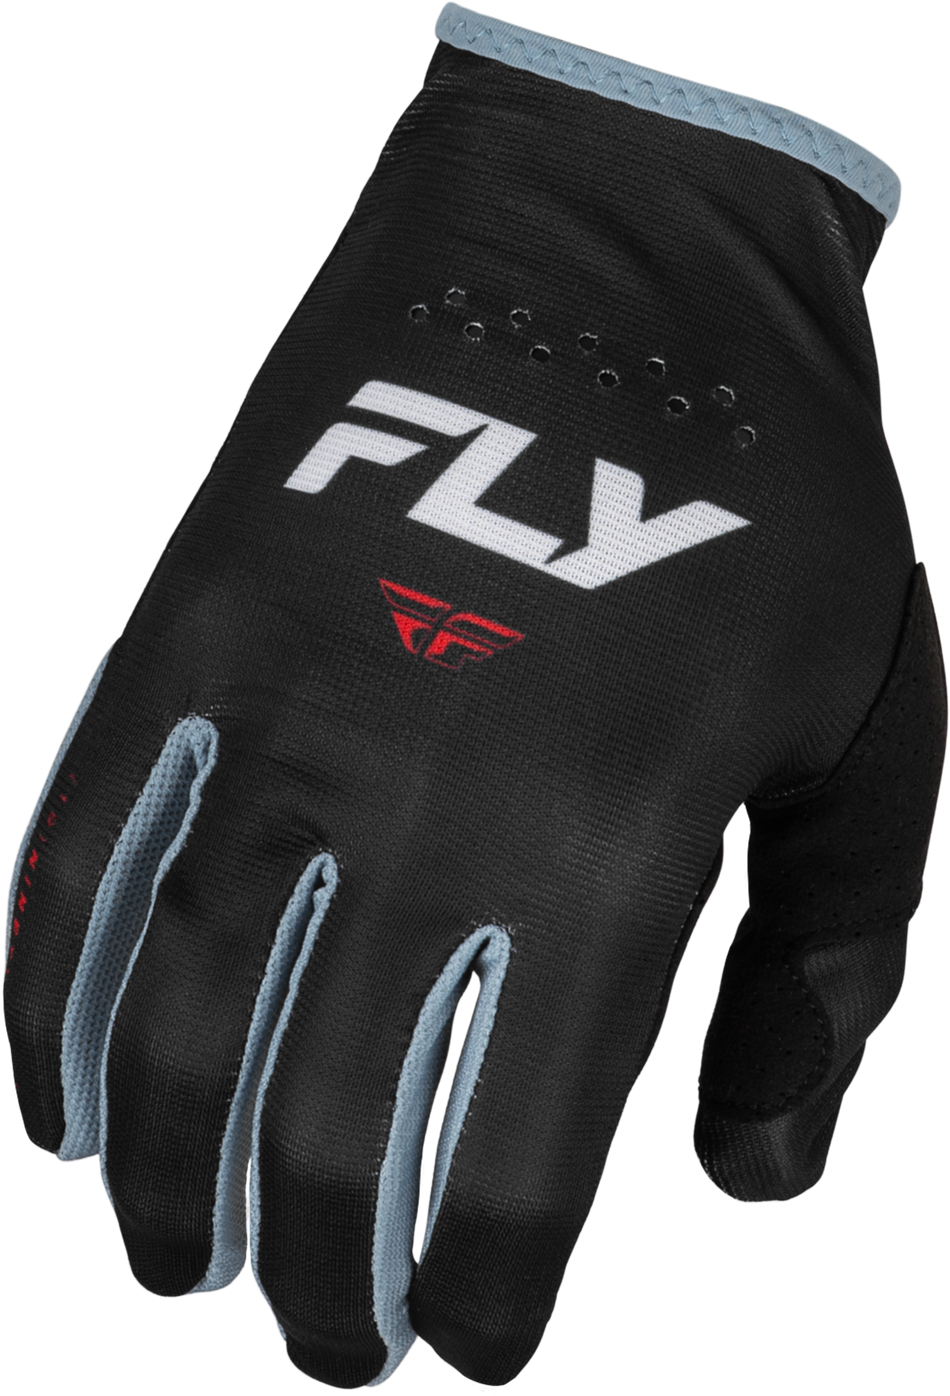 FLY RACING Lite Gloves Black/White/Red Xl 377-710X